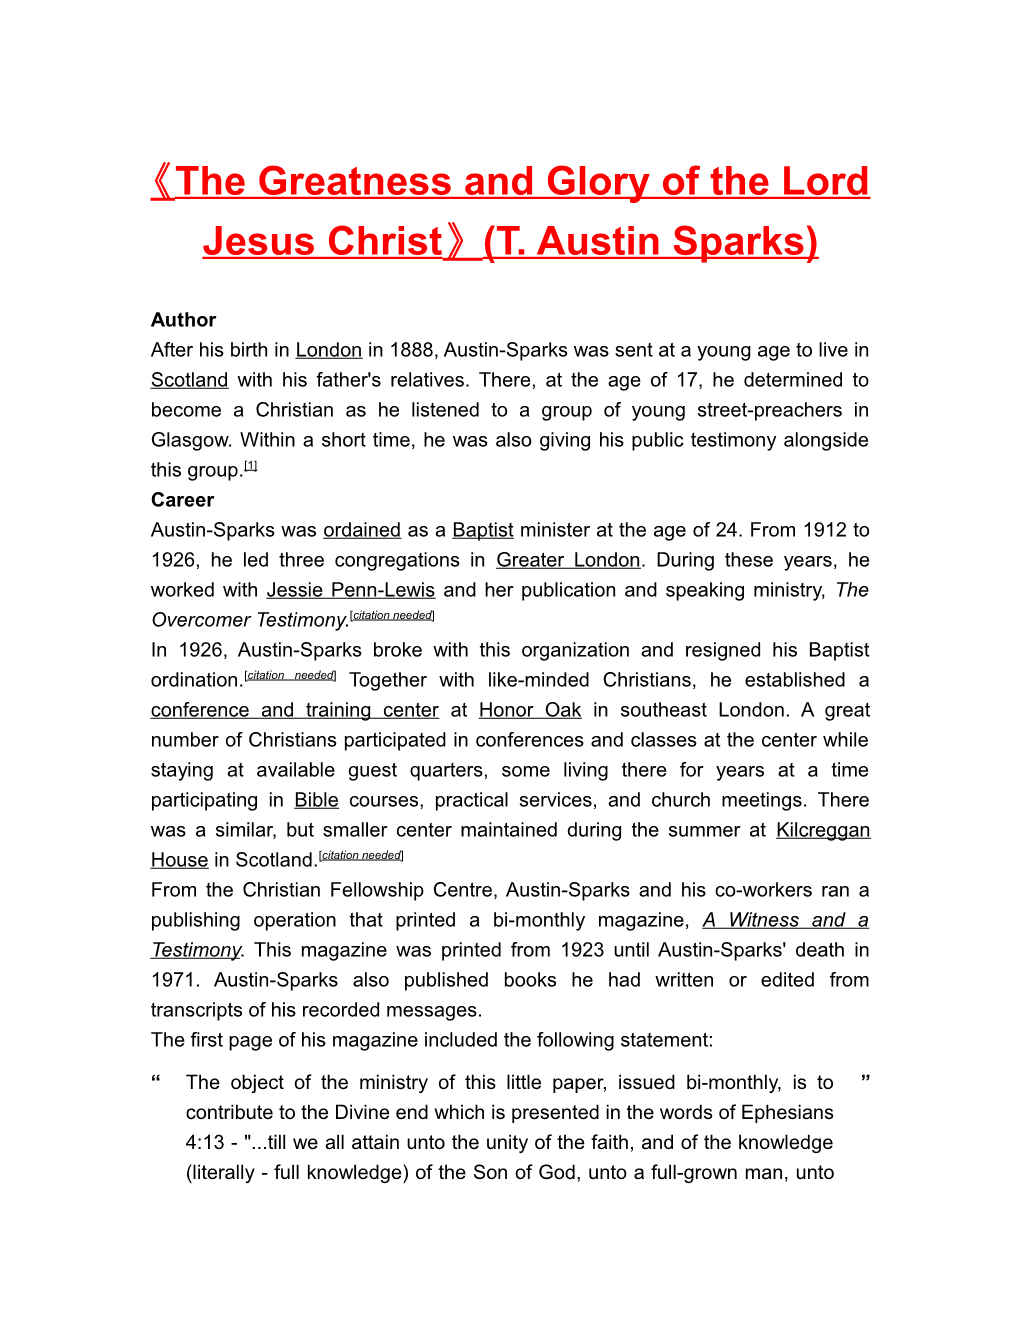 The Greatness and Glory of the Lord Jesus Christ (T. Austin Sparks)